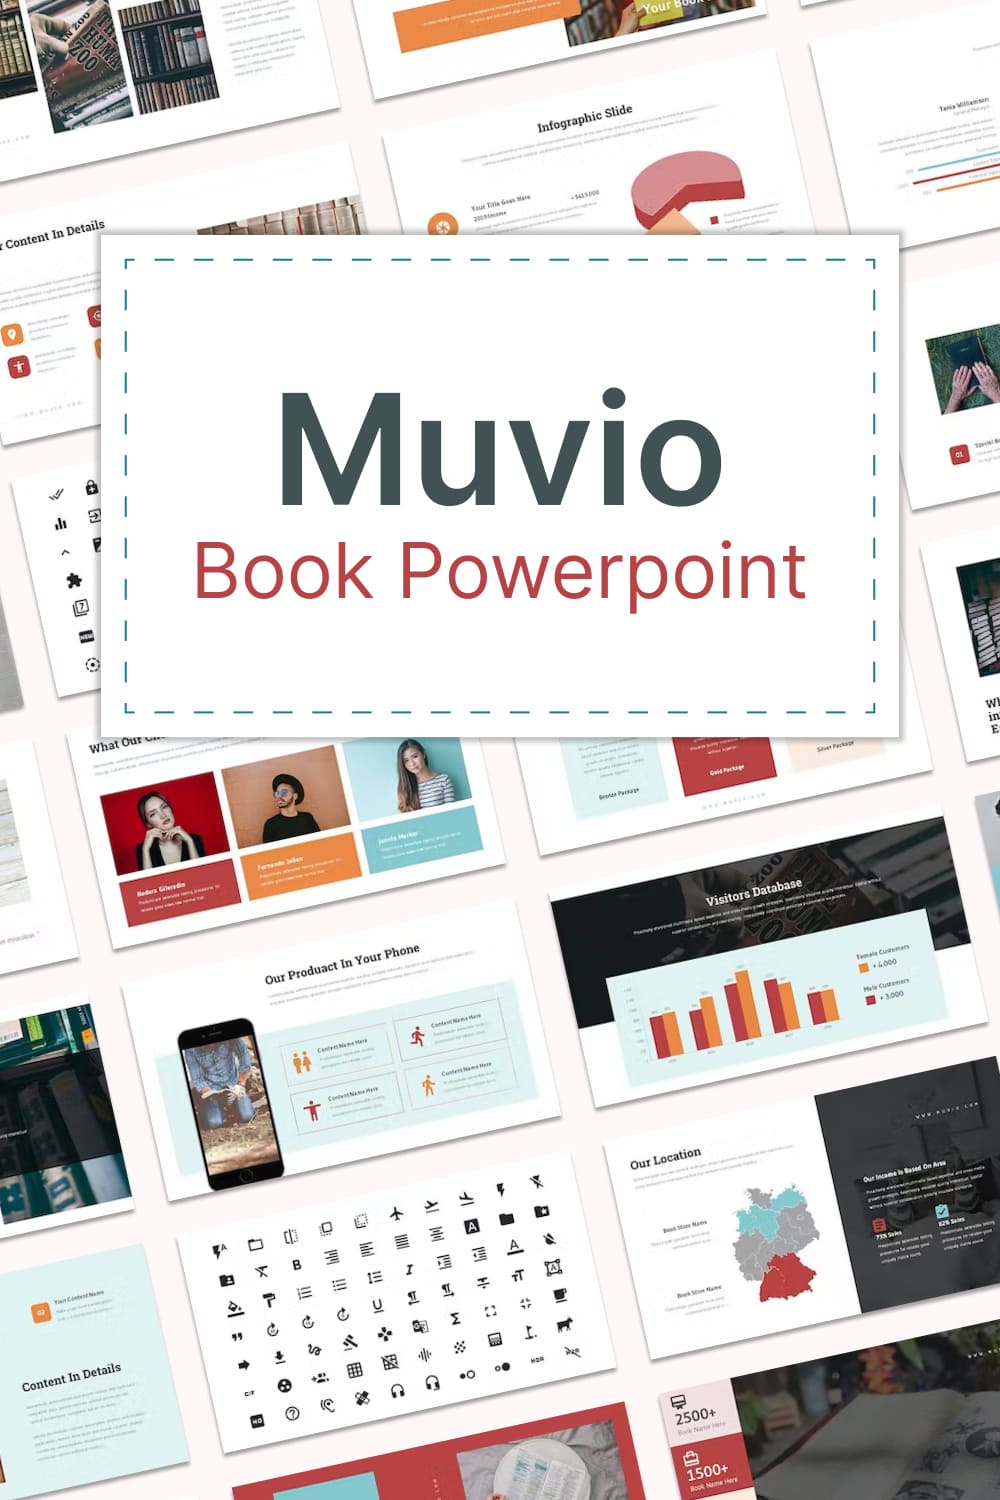 Muvio book powerpoint - pinterest image preview.